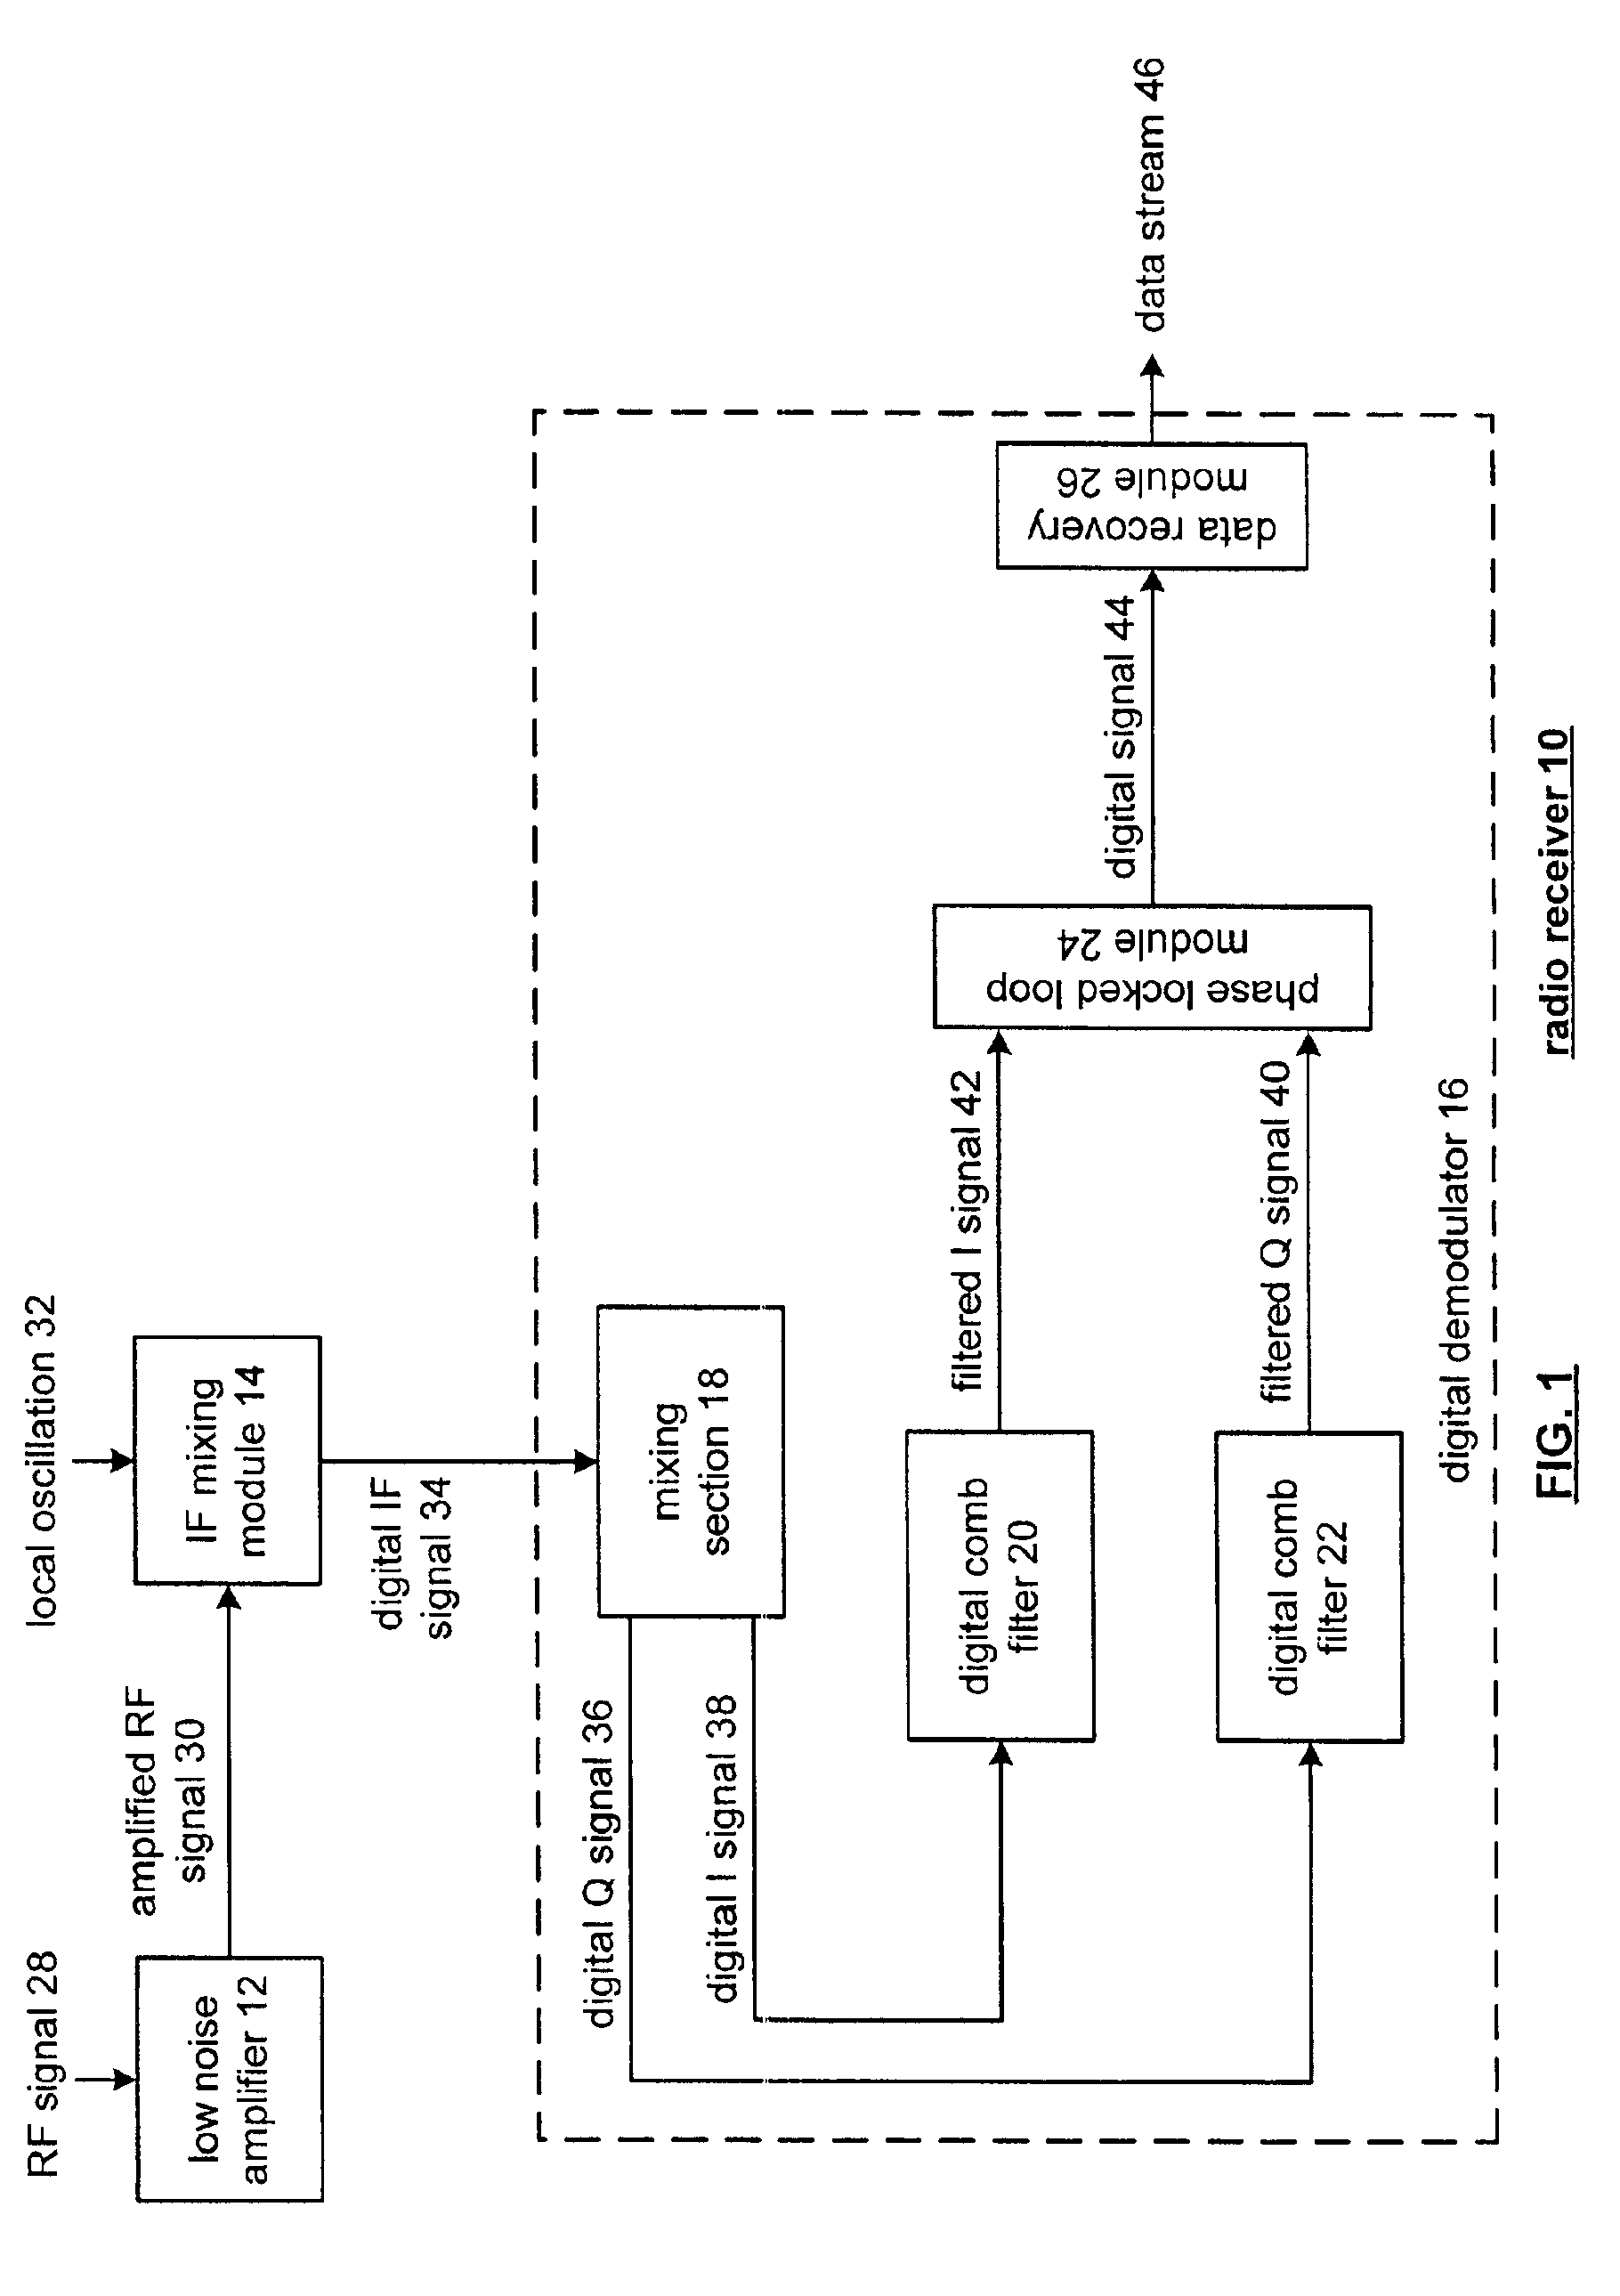 Digital demodulation and applications thereof